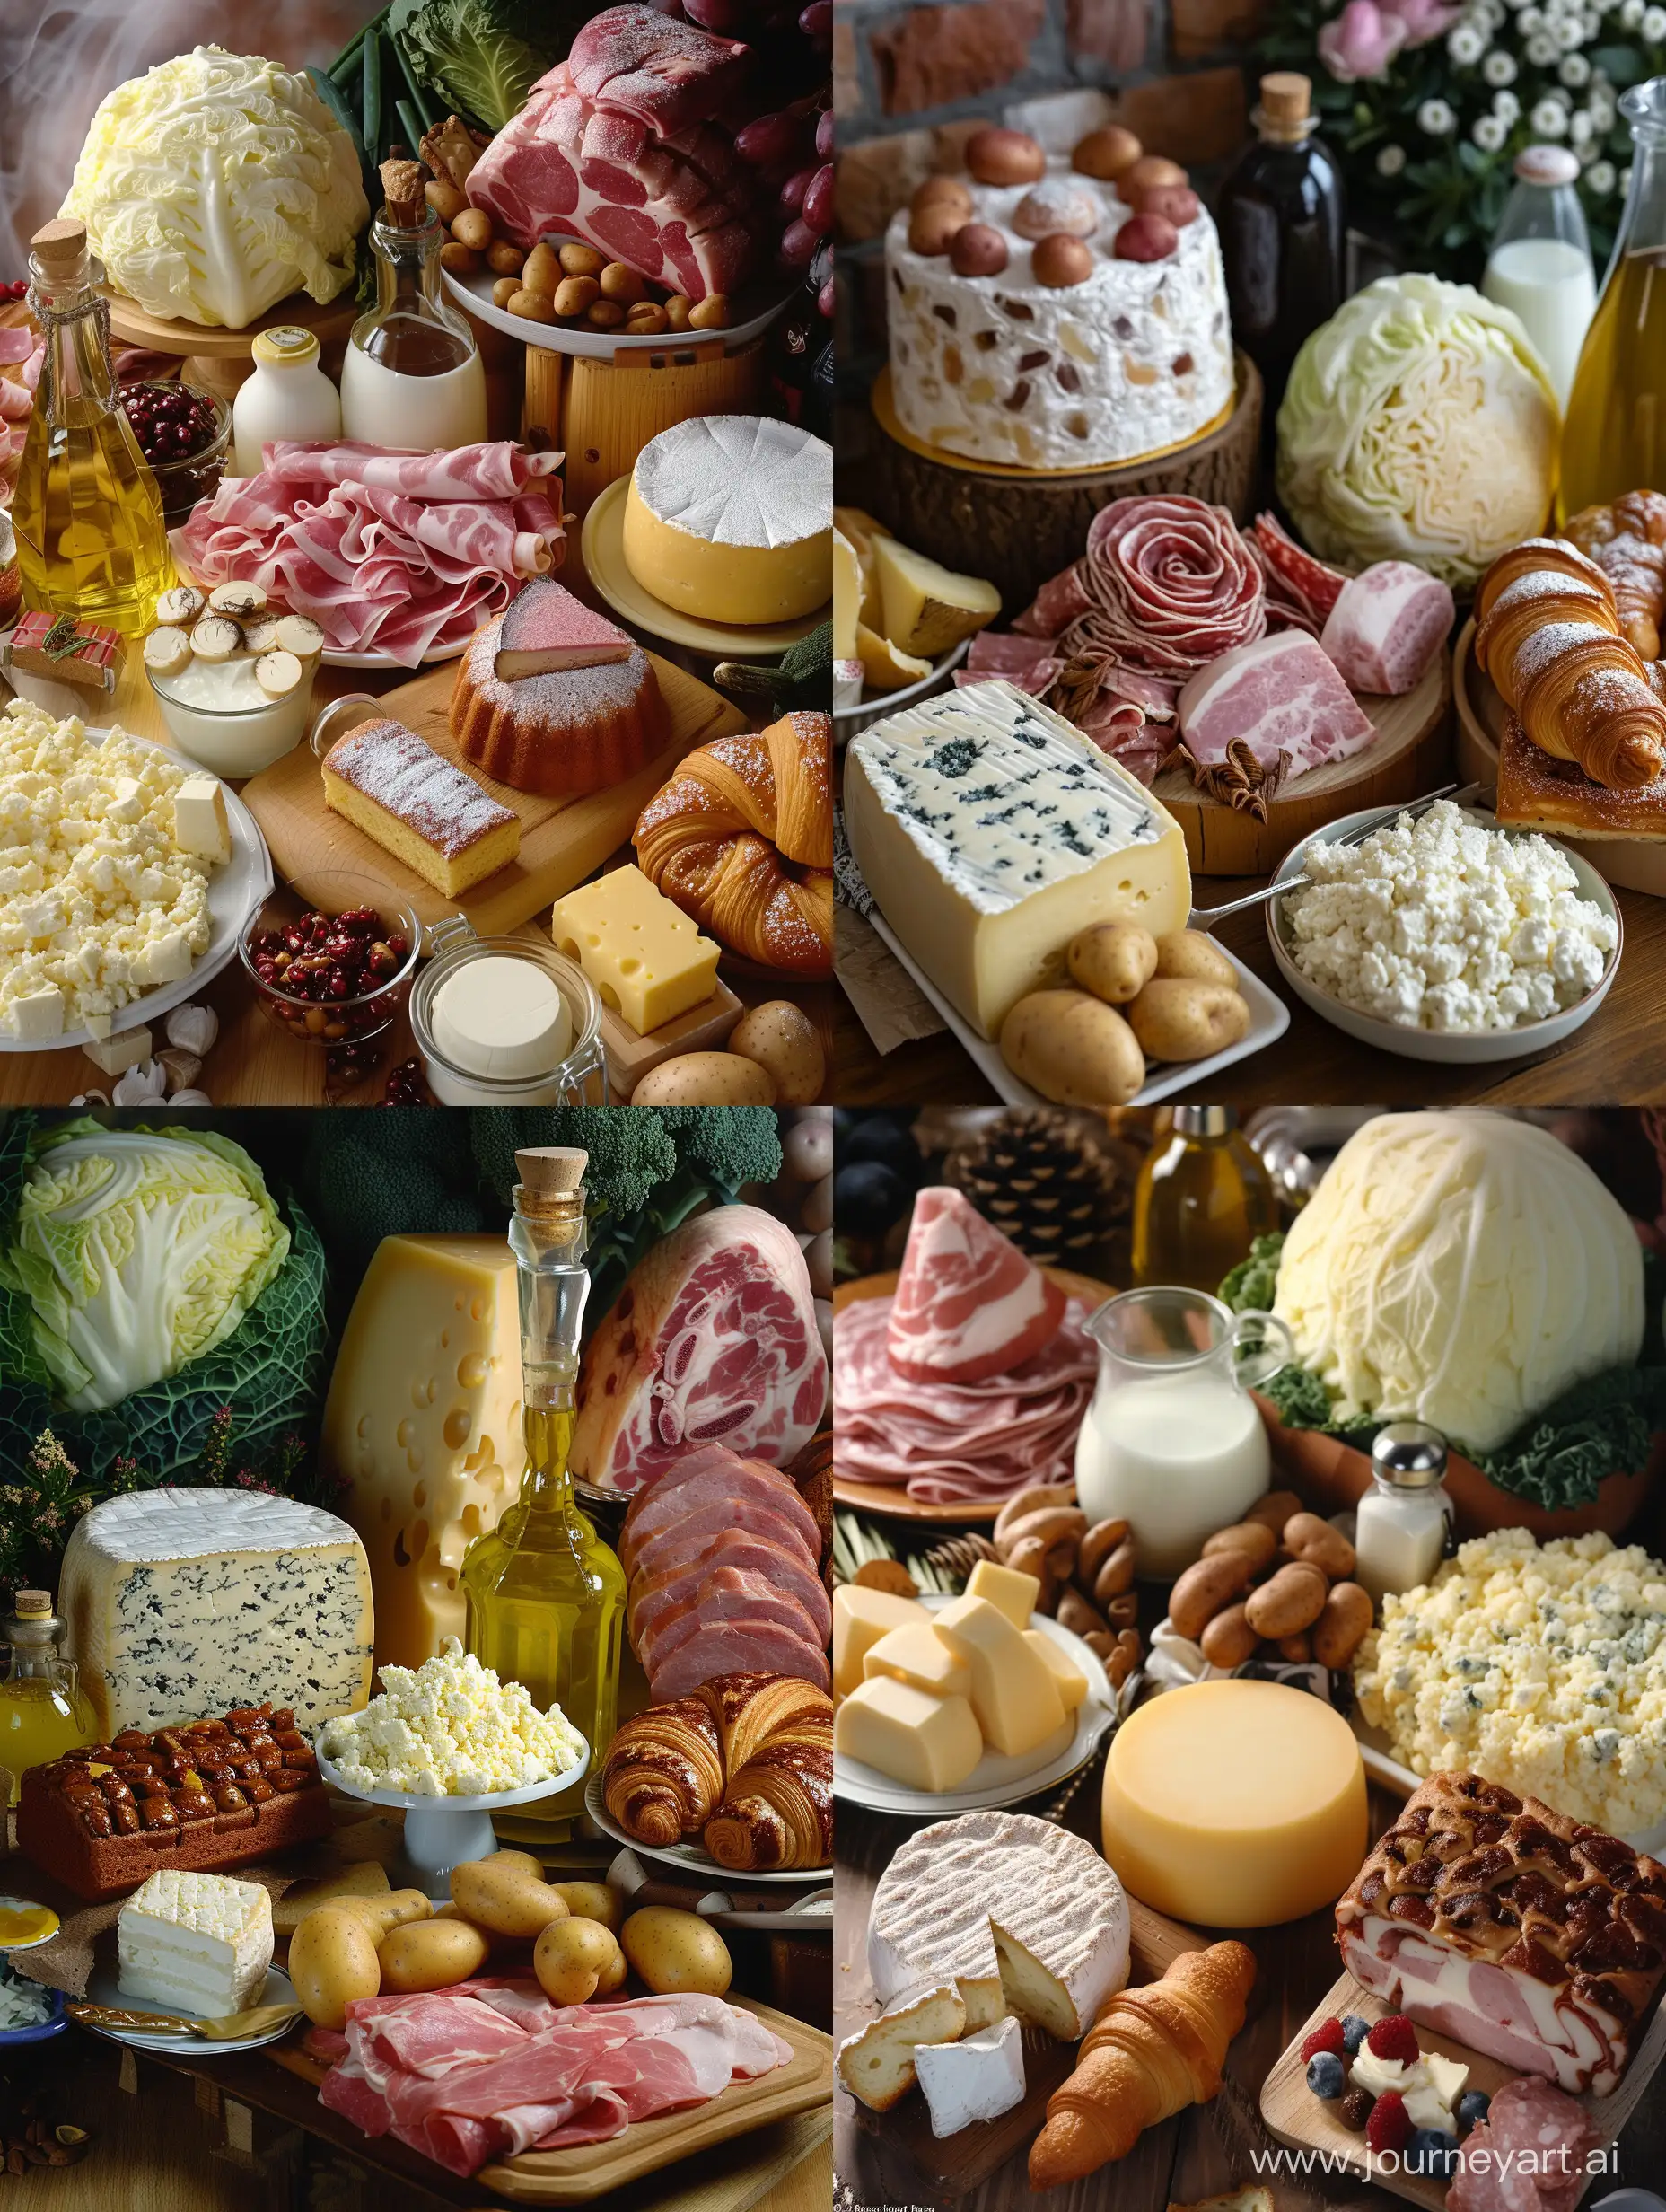 FarmFresh-Delights-Bountiful-Spread-of-Cheeses-Meats-and-Pastries